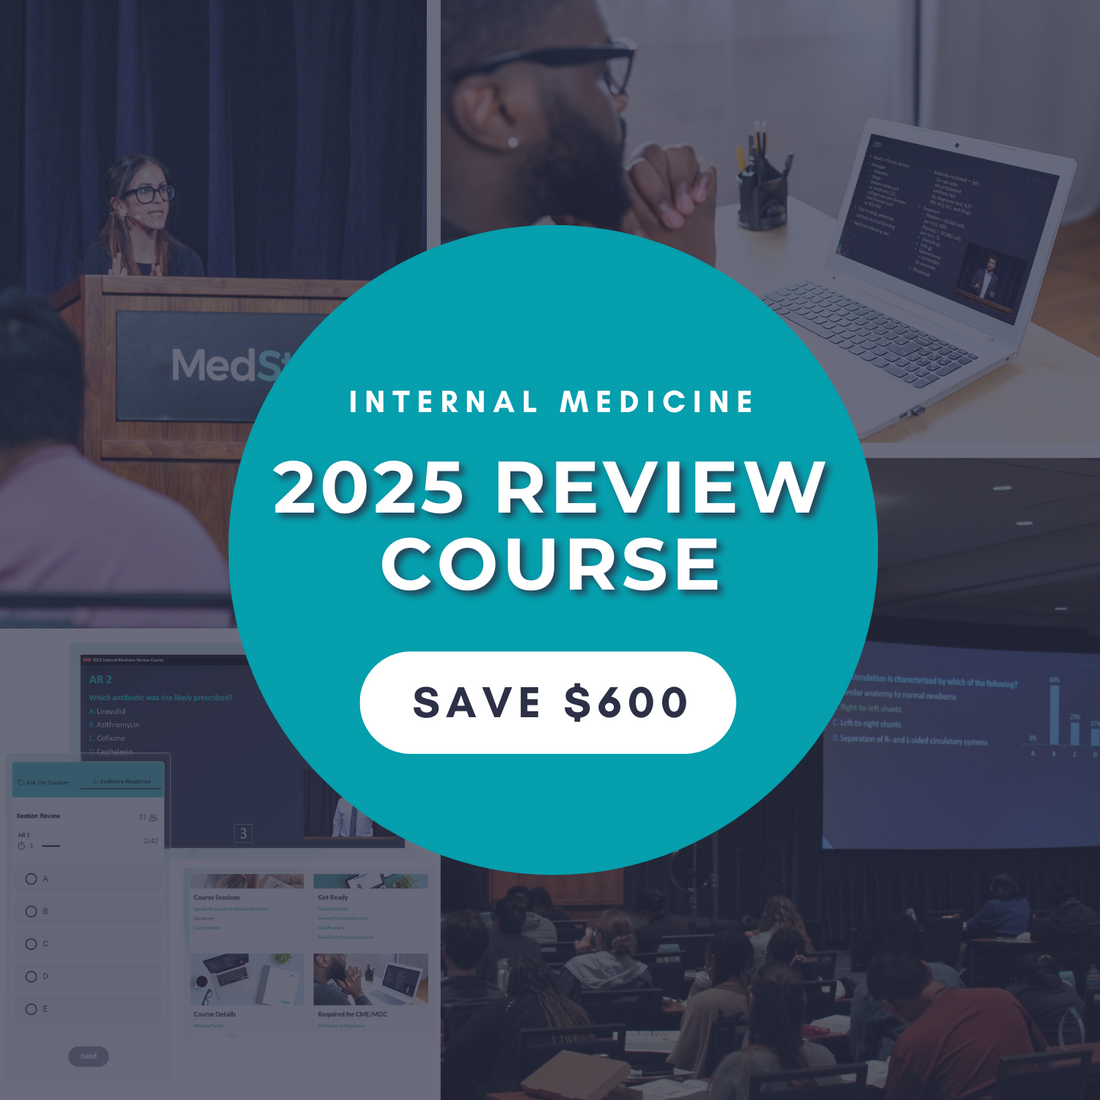 NEW! 2025 Internal Medicine Review Course